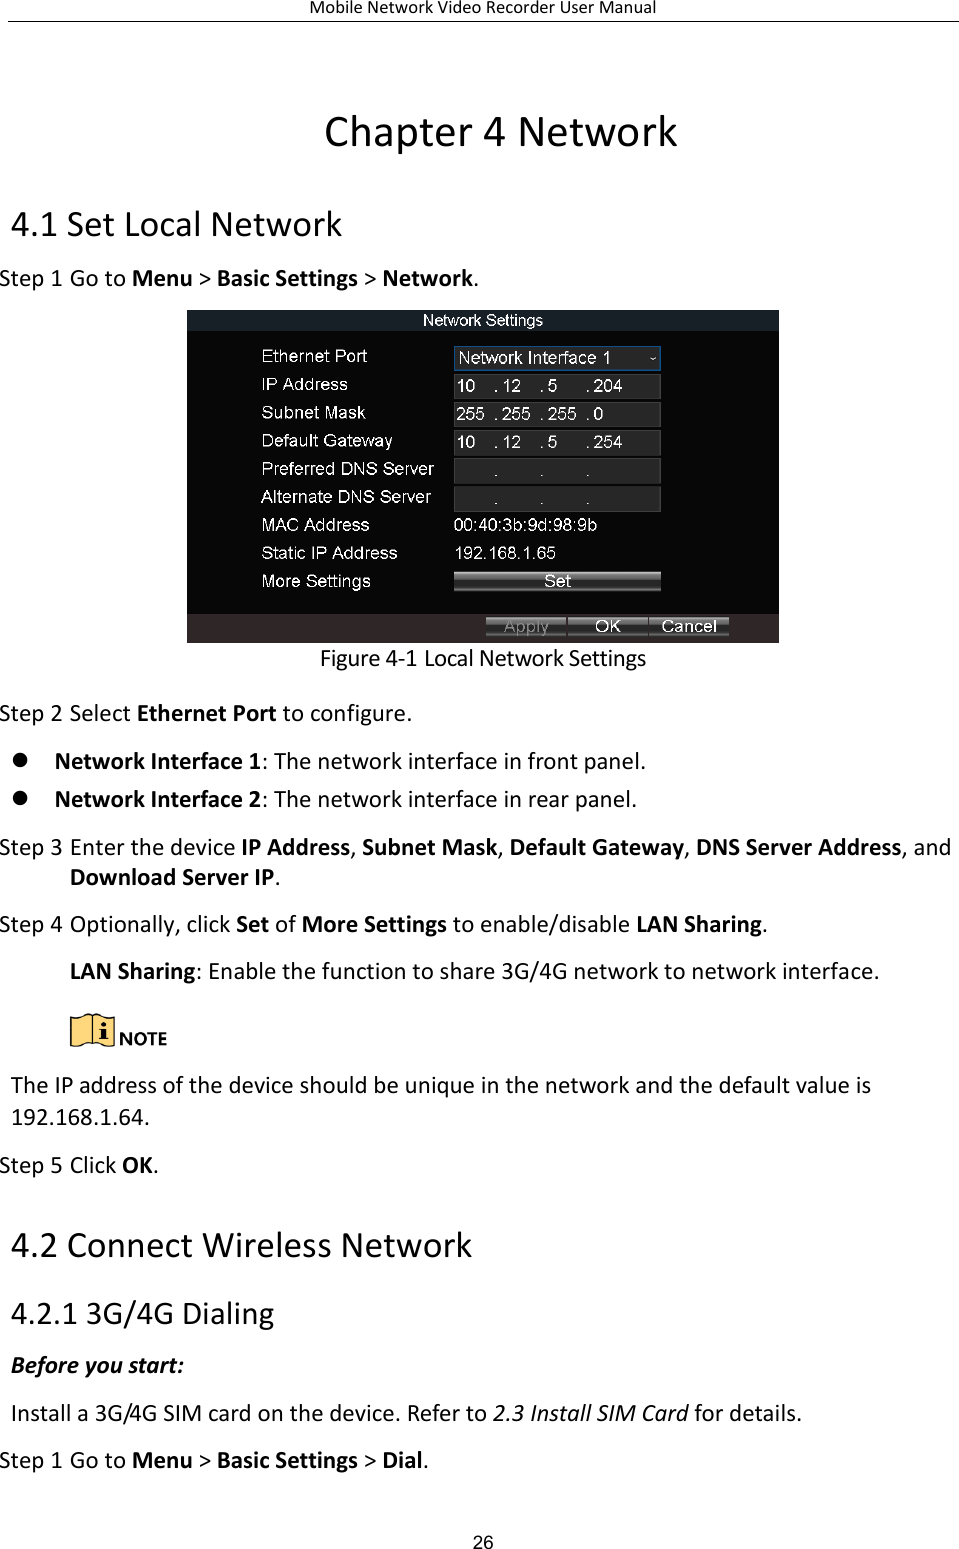 Mobile Network Video Recorder User Manual 26 Chapter 4 Network 4.1 Set Local Network Step 1 Go to Menu &gt; Basic Settings &gt; Network.  Figure 4-1 Local Network Settings Step 2 Select Ethernet Port to configure.  Network Interface 1: The network interface in front panel.  Network Interface 2: The network interface in rear panel. Step 3 Enter the device IP Address, Subnet Mask, Default Gateway, DNS Server Address, and Download Server IP. Step 4 Optionally, click Set of More Settings to enable/disable LAN Sharing. LAN Sharing: Enable the function to share 3G/4G network to network interface.   The IP address of the device should be unique in the network and the default value is 192.168.1.64. Step 5 Click OK. 4.2 Connect Wireless Network 4.2.1 3G/4G Dialing Before you start: Install a 3G/4G SIM card on the device. Refer to 2.3 Install SIM Card for details. Step 1 Go to Menu &gt; Basic Settings &gt; Dial. 